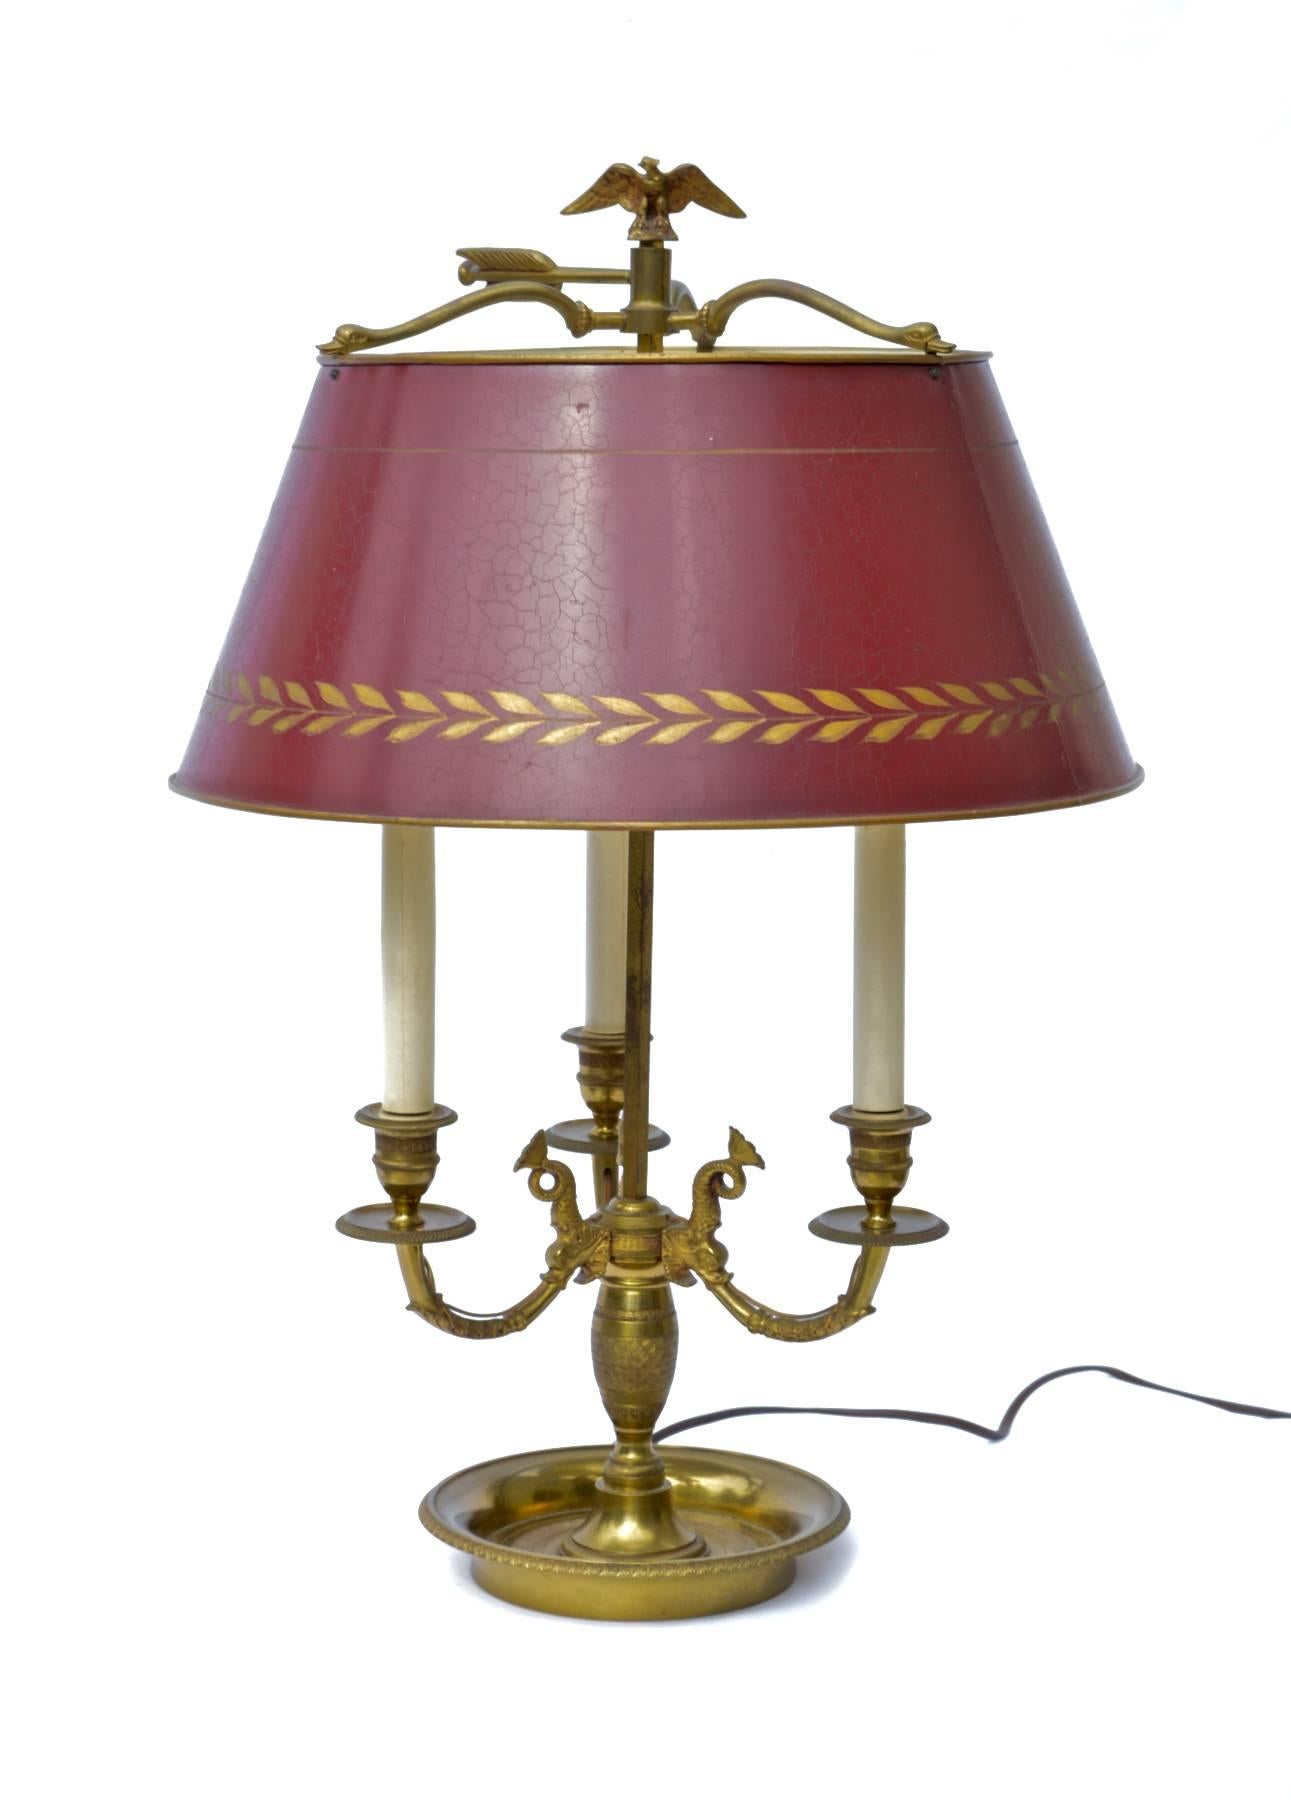 A Classic bouillotte table lamp in the French Empire taste. Vintage 1950s, the stylish light will perform well in any space in which it is employed. Hand-painted deep red tole' shade.